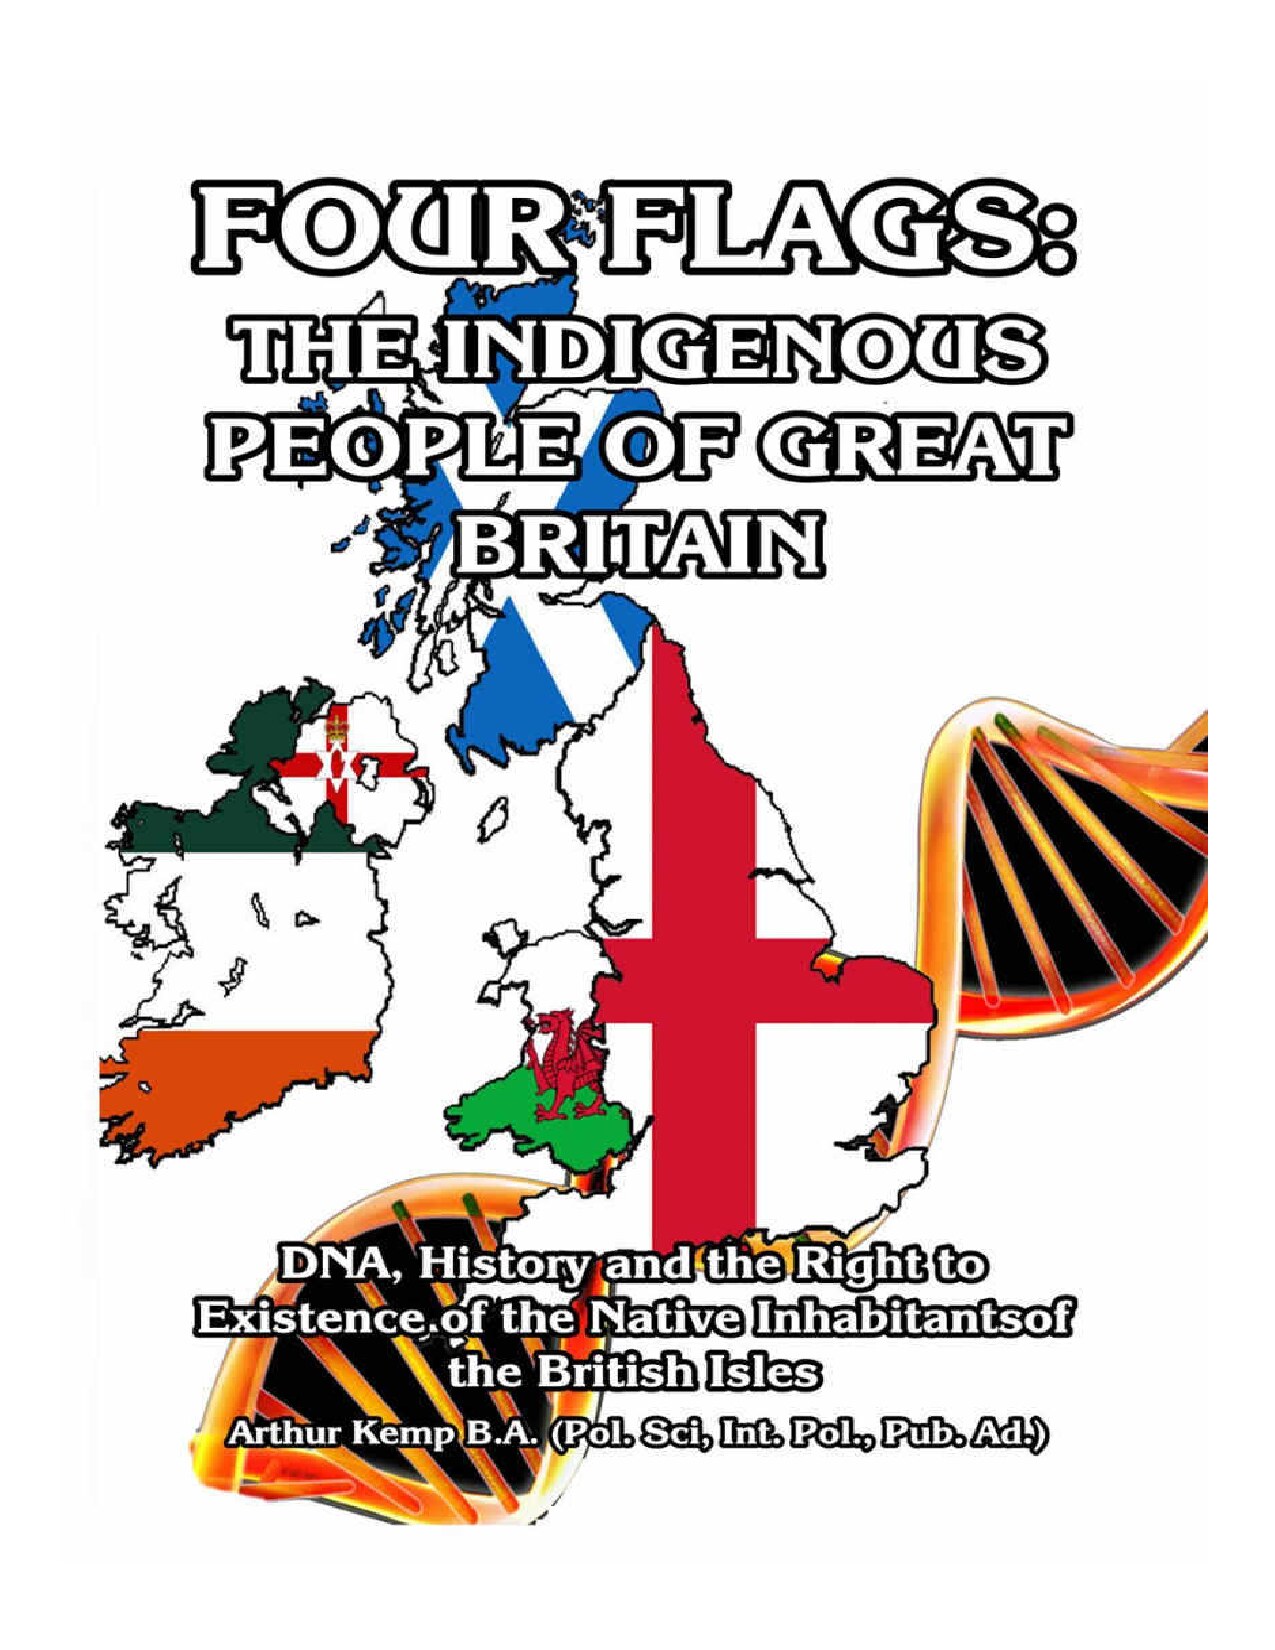 Kemp, Arthur; Four Flags, The Indigenous People of Britain